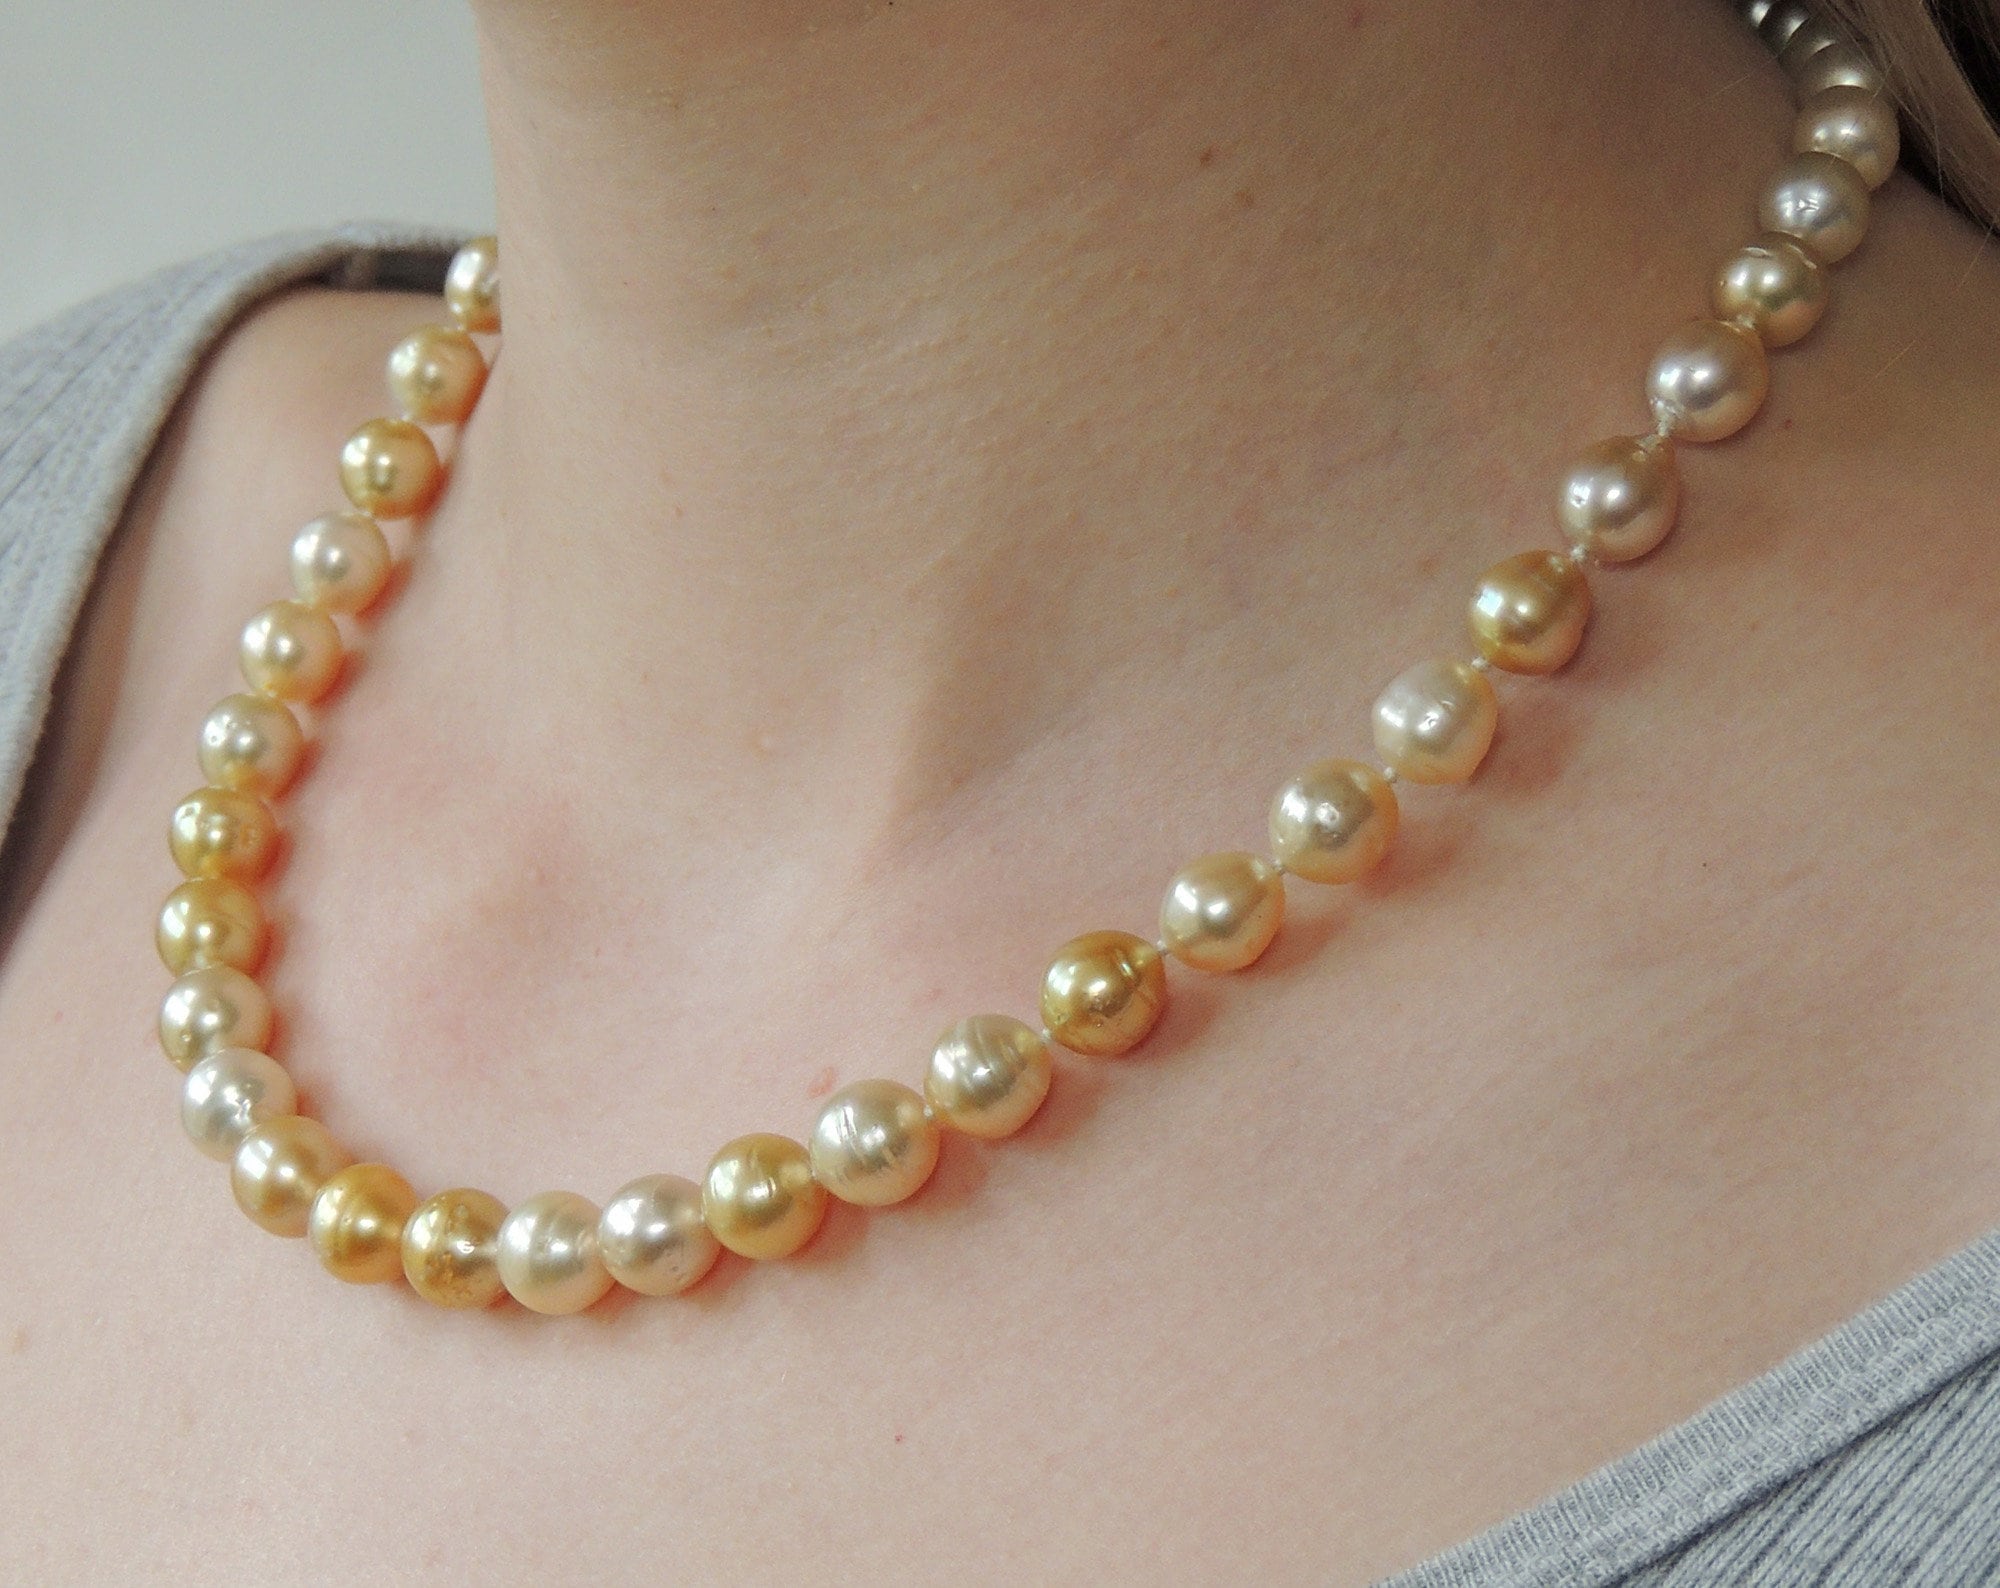 Golden South Sea Pearl Necklace Graduating from 8.2 to 9.8 mm 18 inch Length 14K Yellow Gold Diamond Clasp